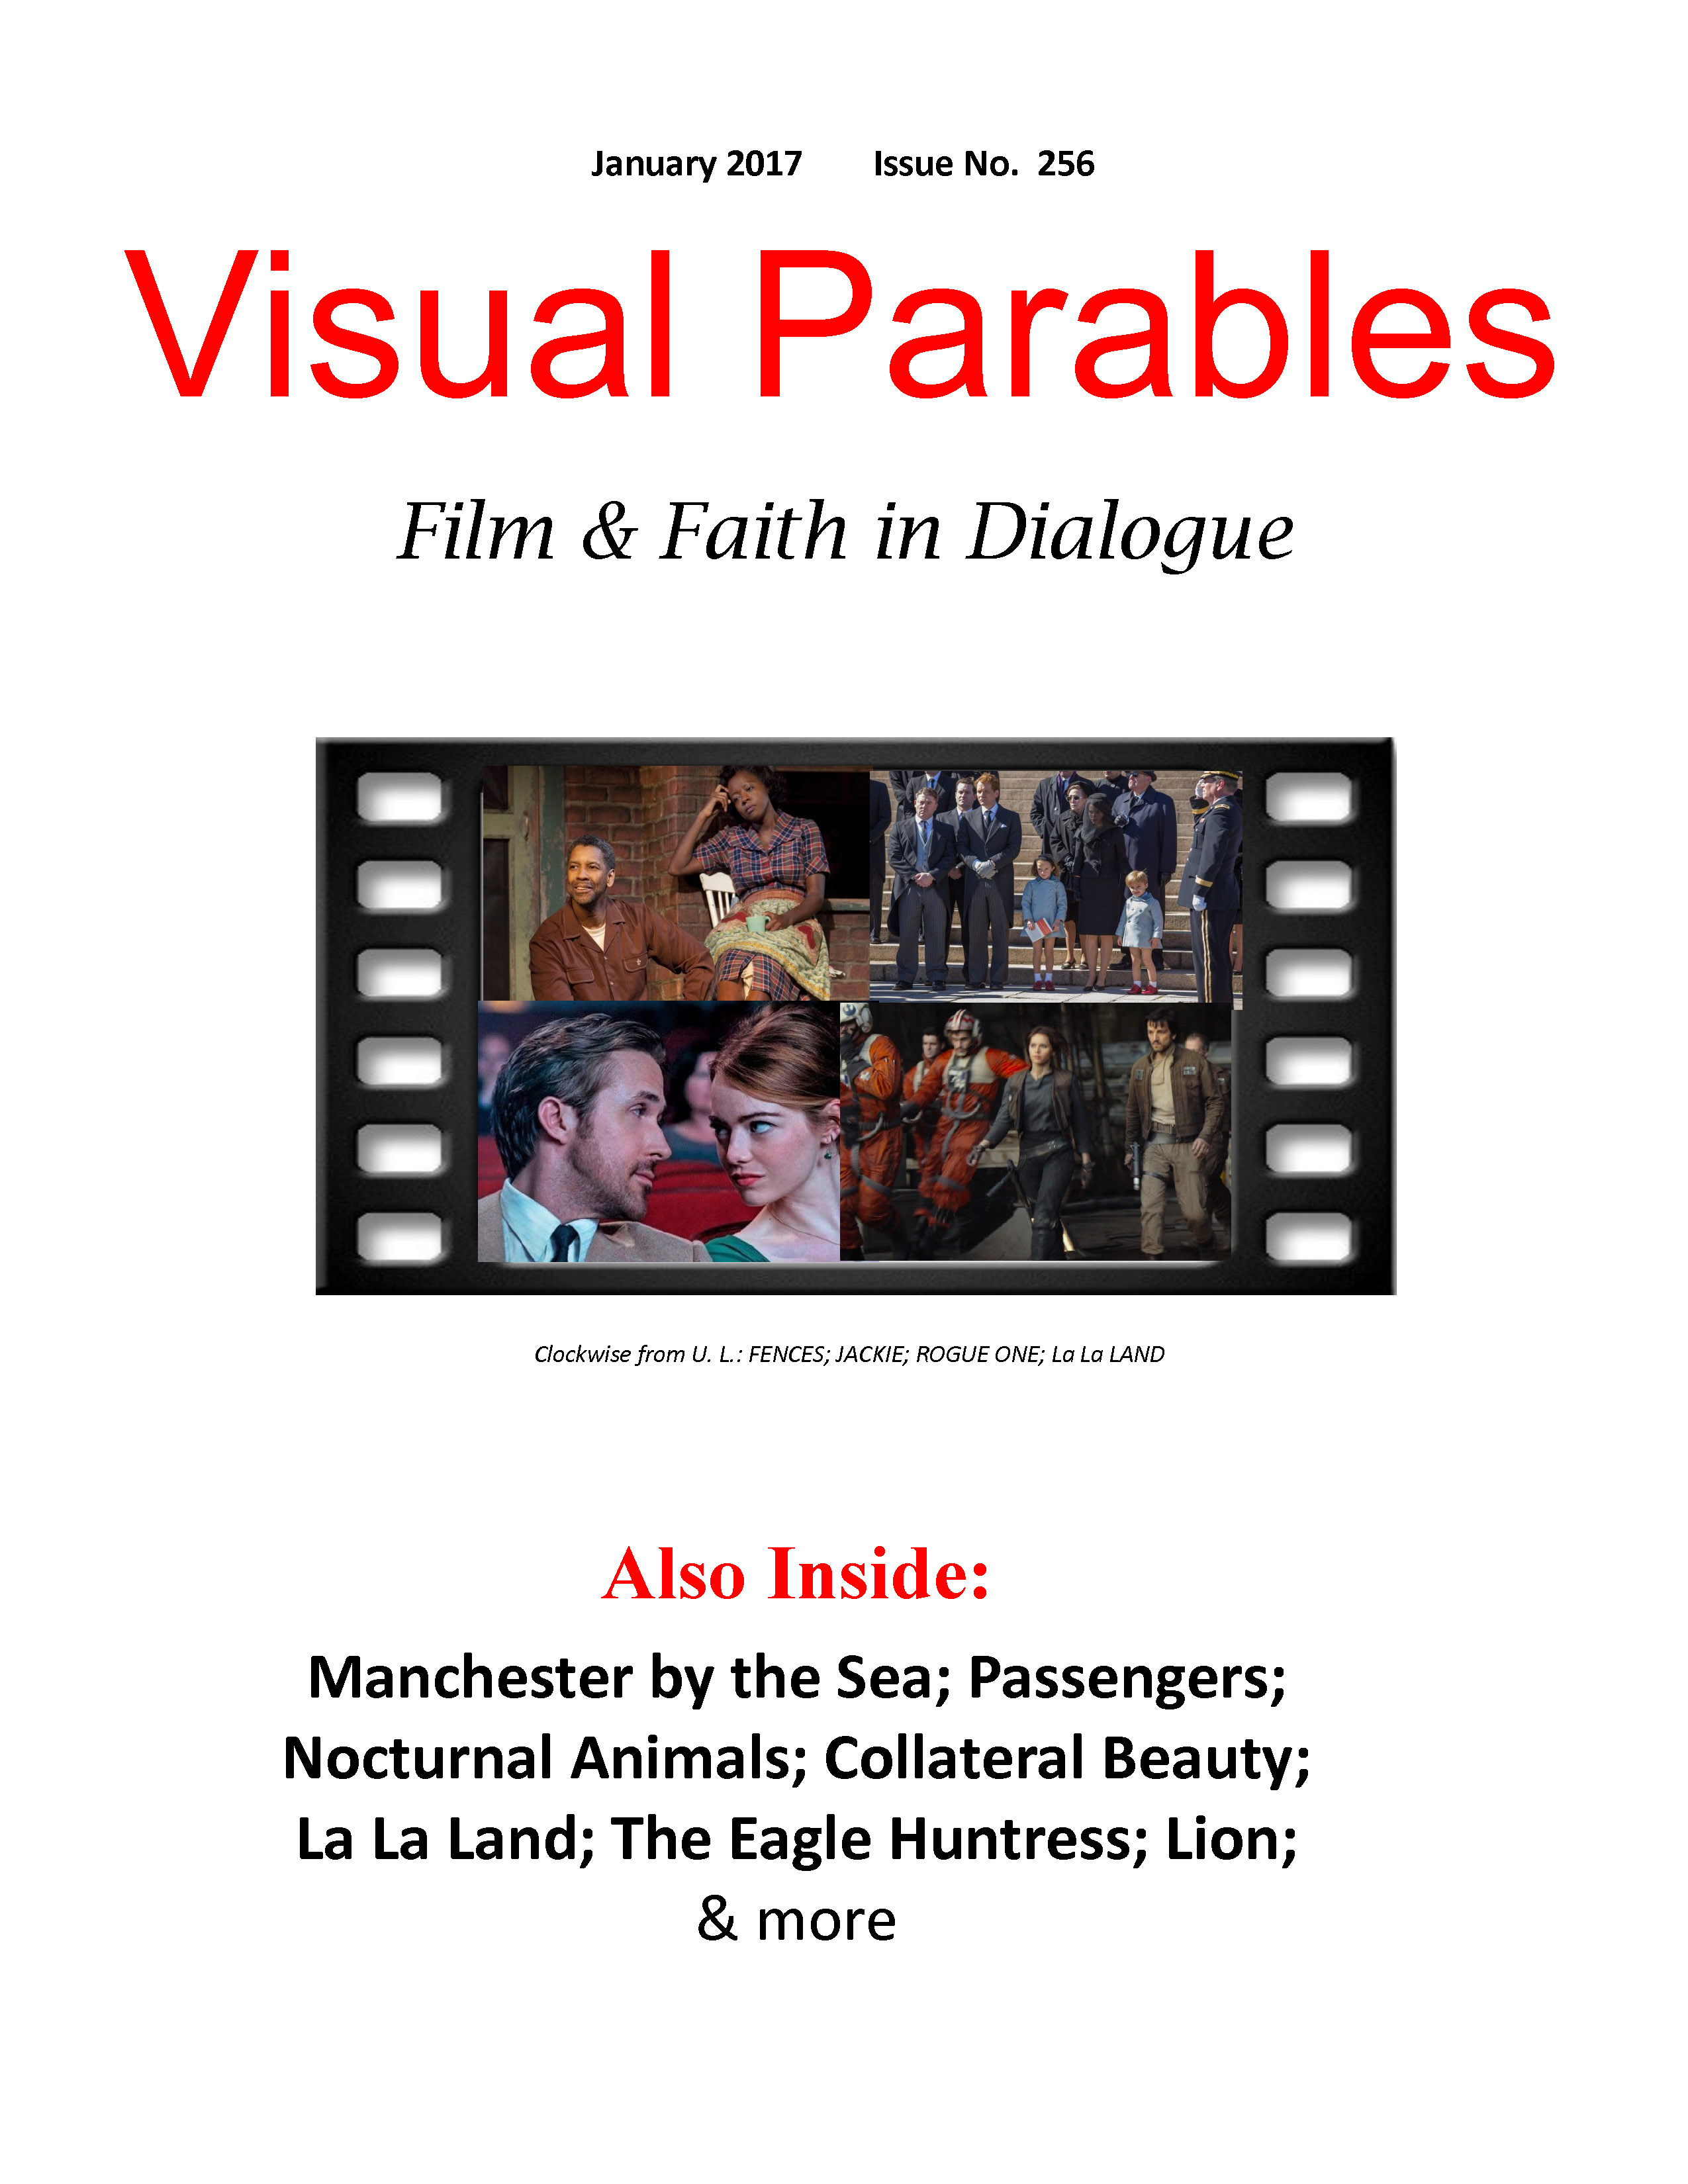 January 2017 Issue of Visual Parables